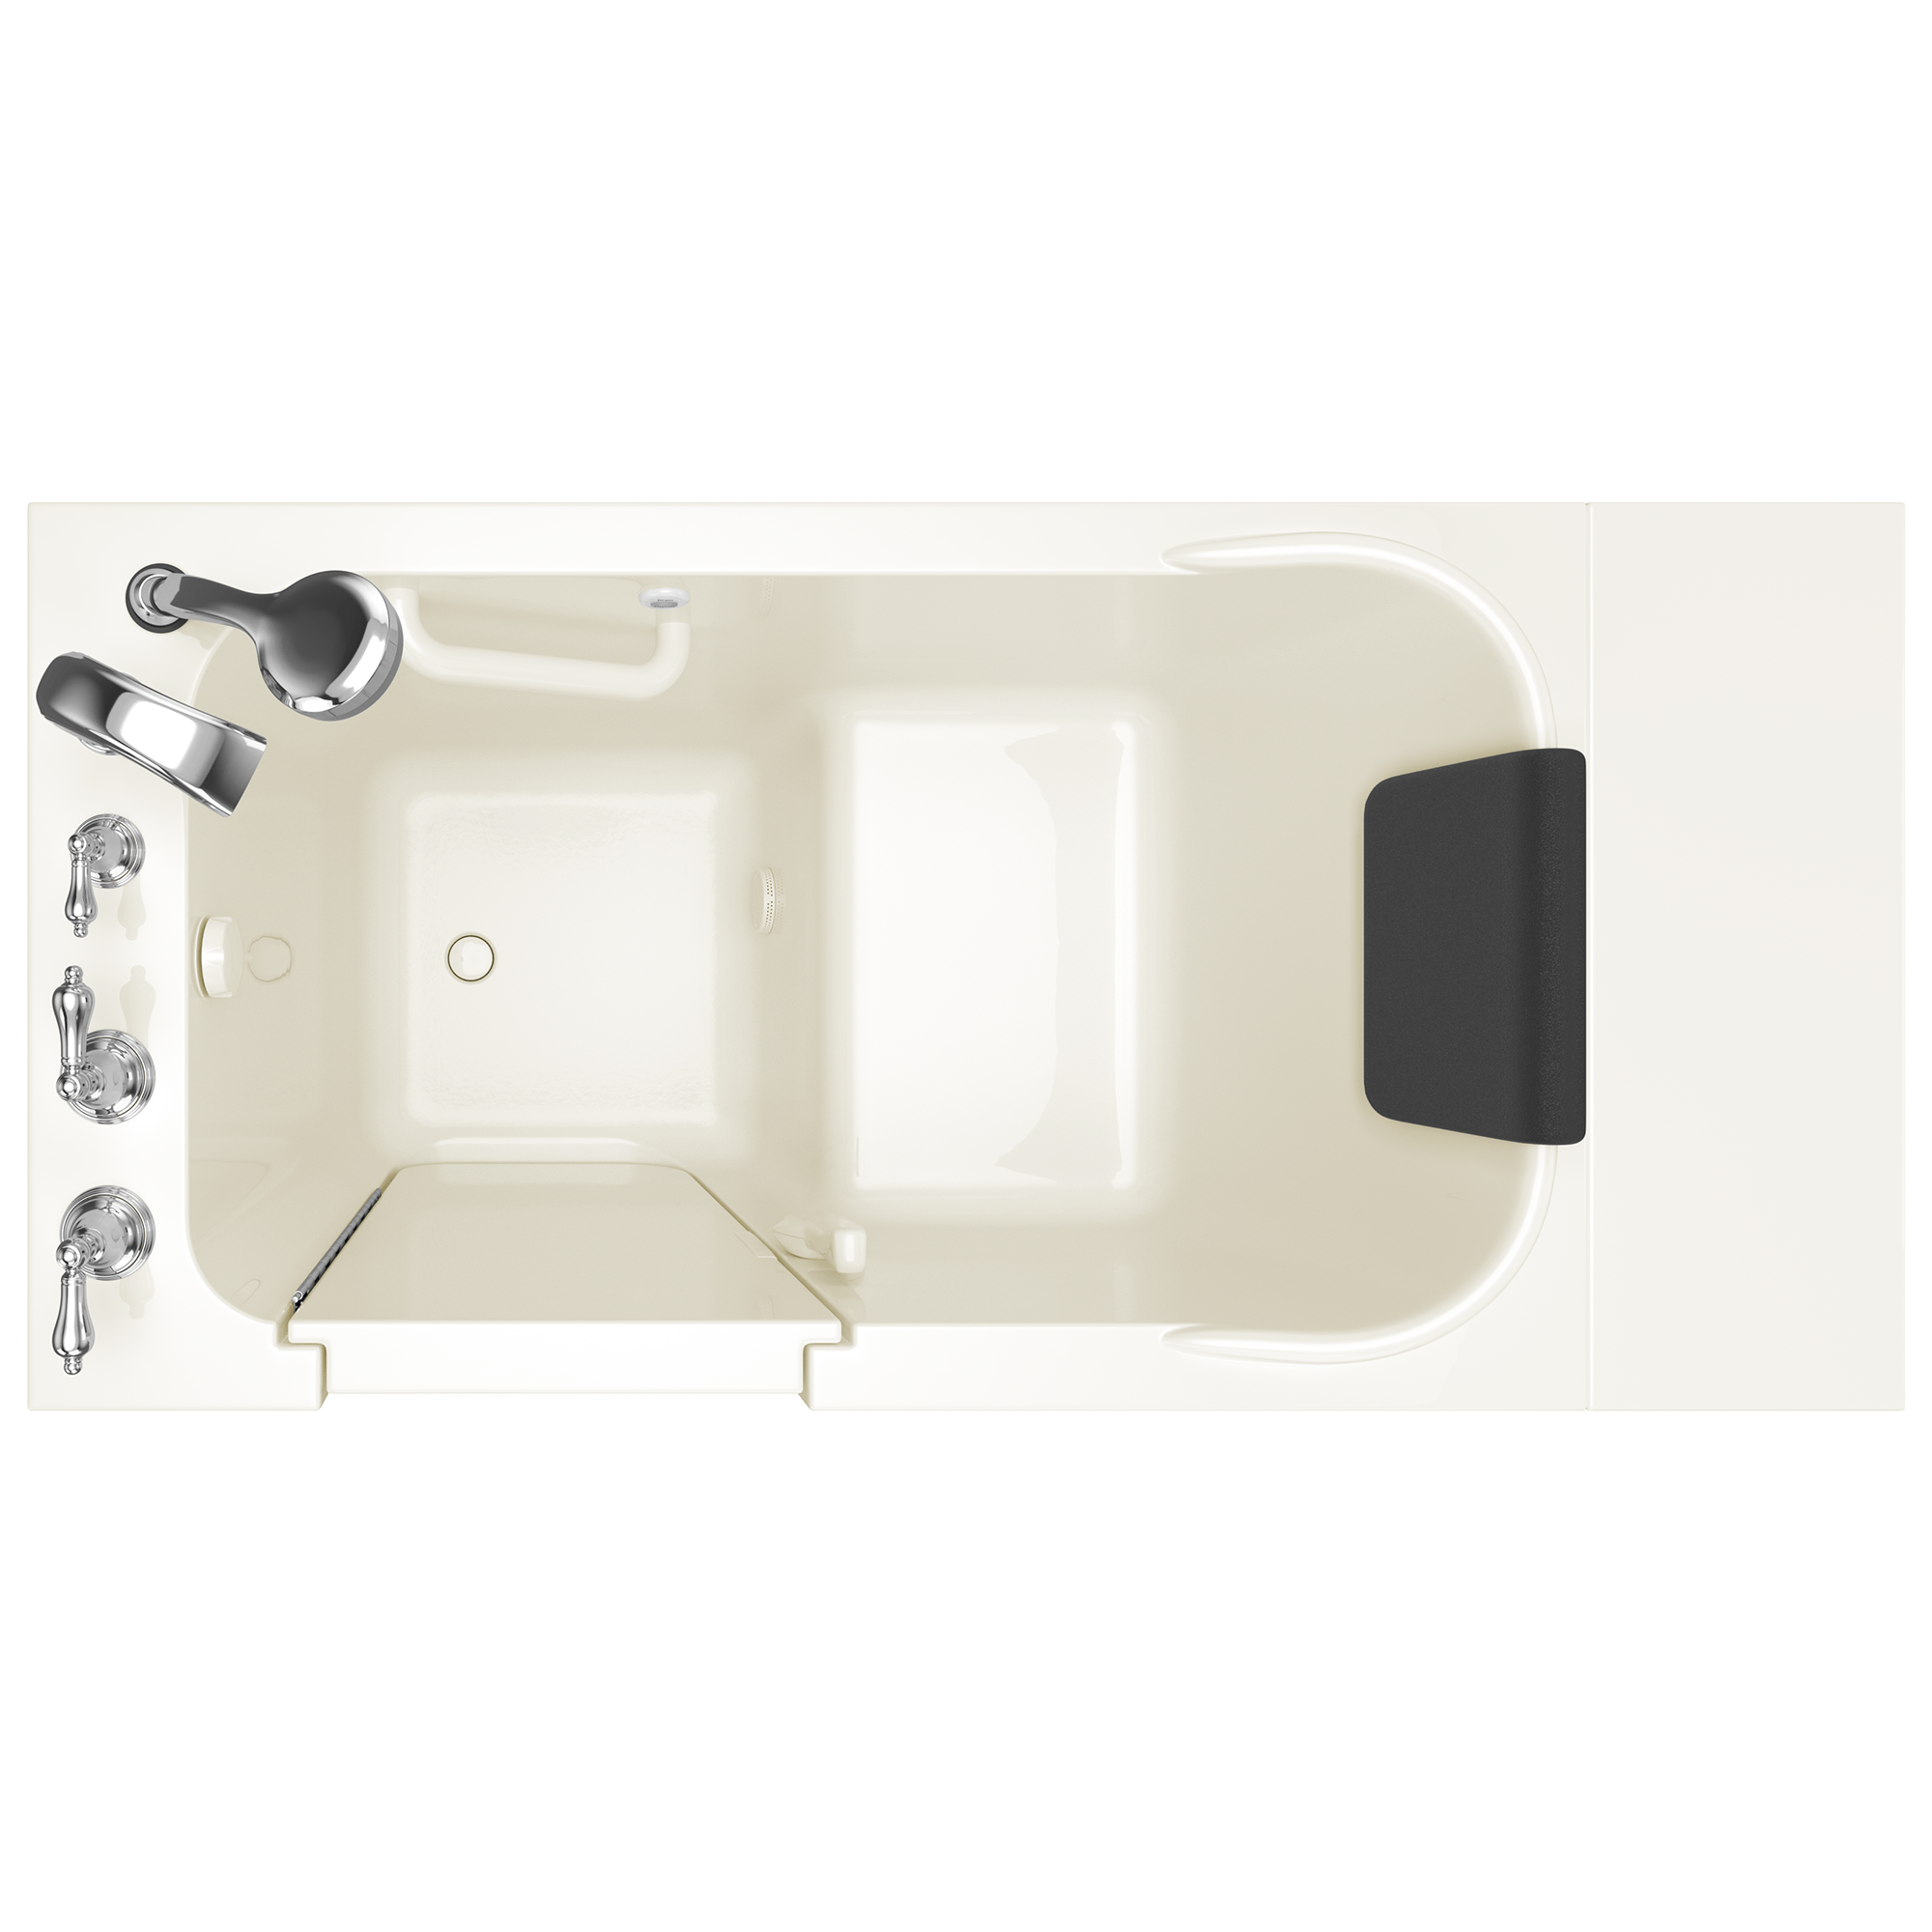 Gelcoat Premium Series 28 x 48-Inch Walk-in Tub With Soaker System - Left-Hand Drain With Faucet